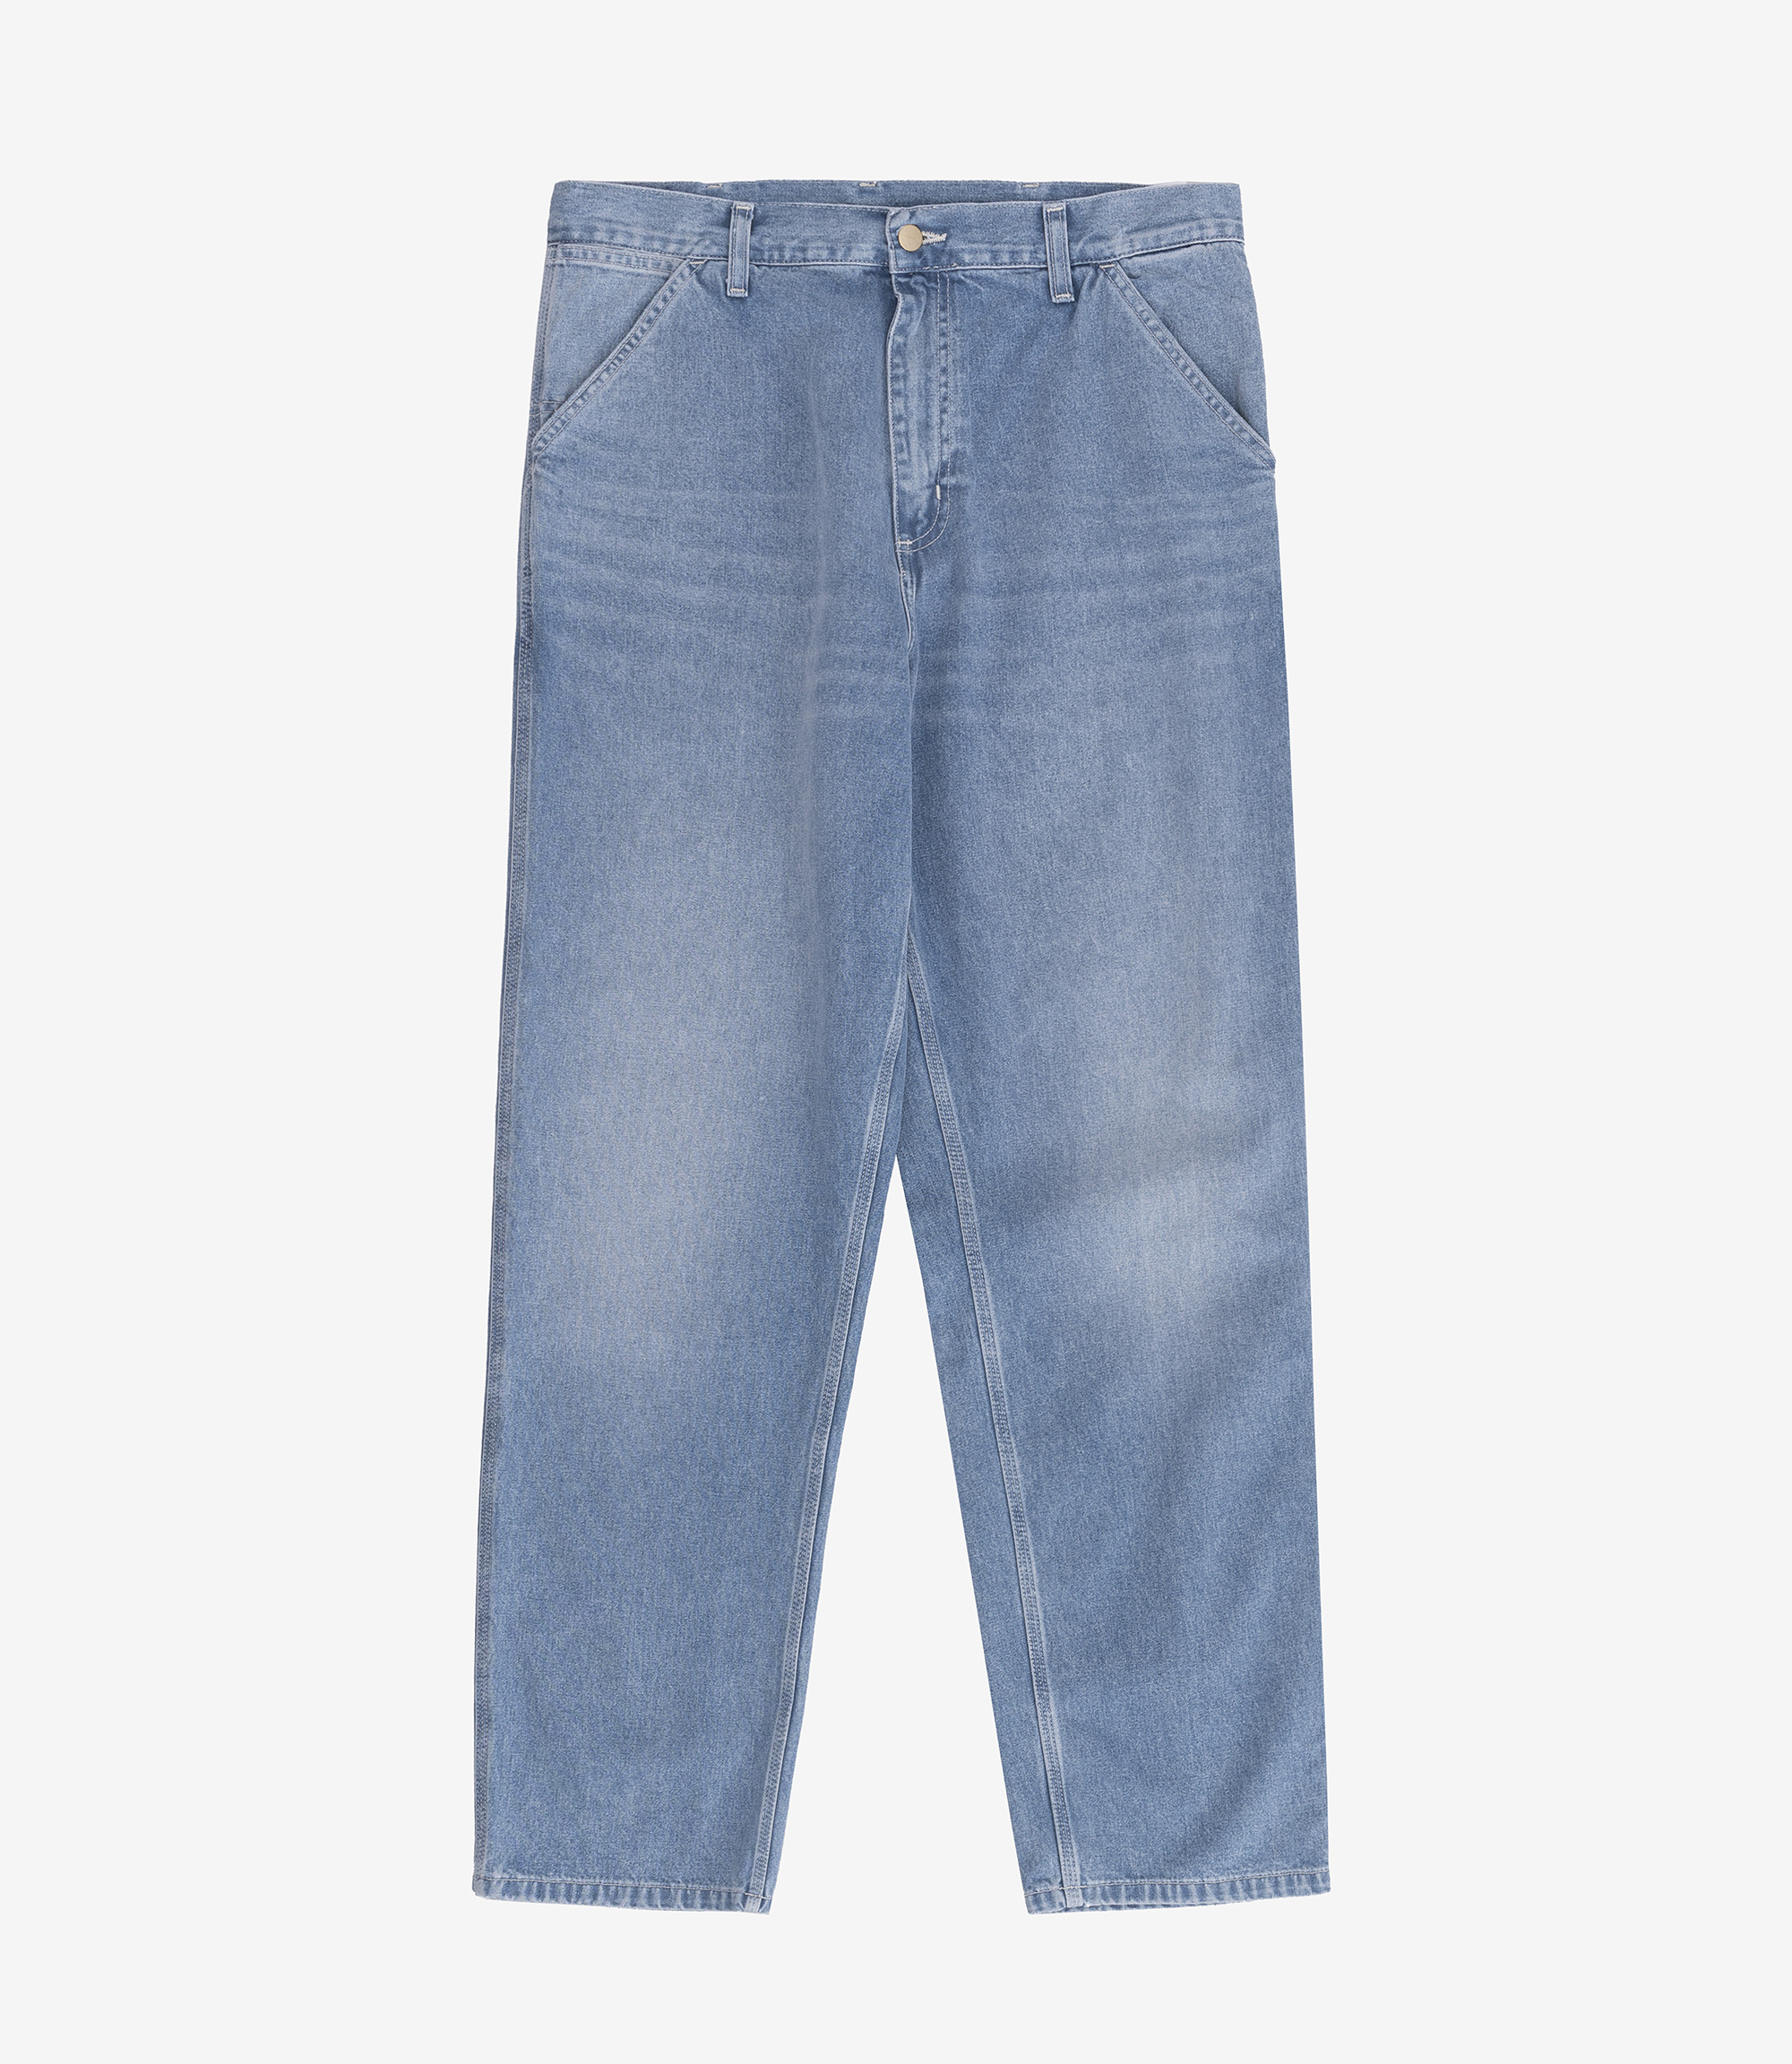 Shop Carhartt WIP Simple Pant 'Norco' Denim Blue Light True Washed at ...